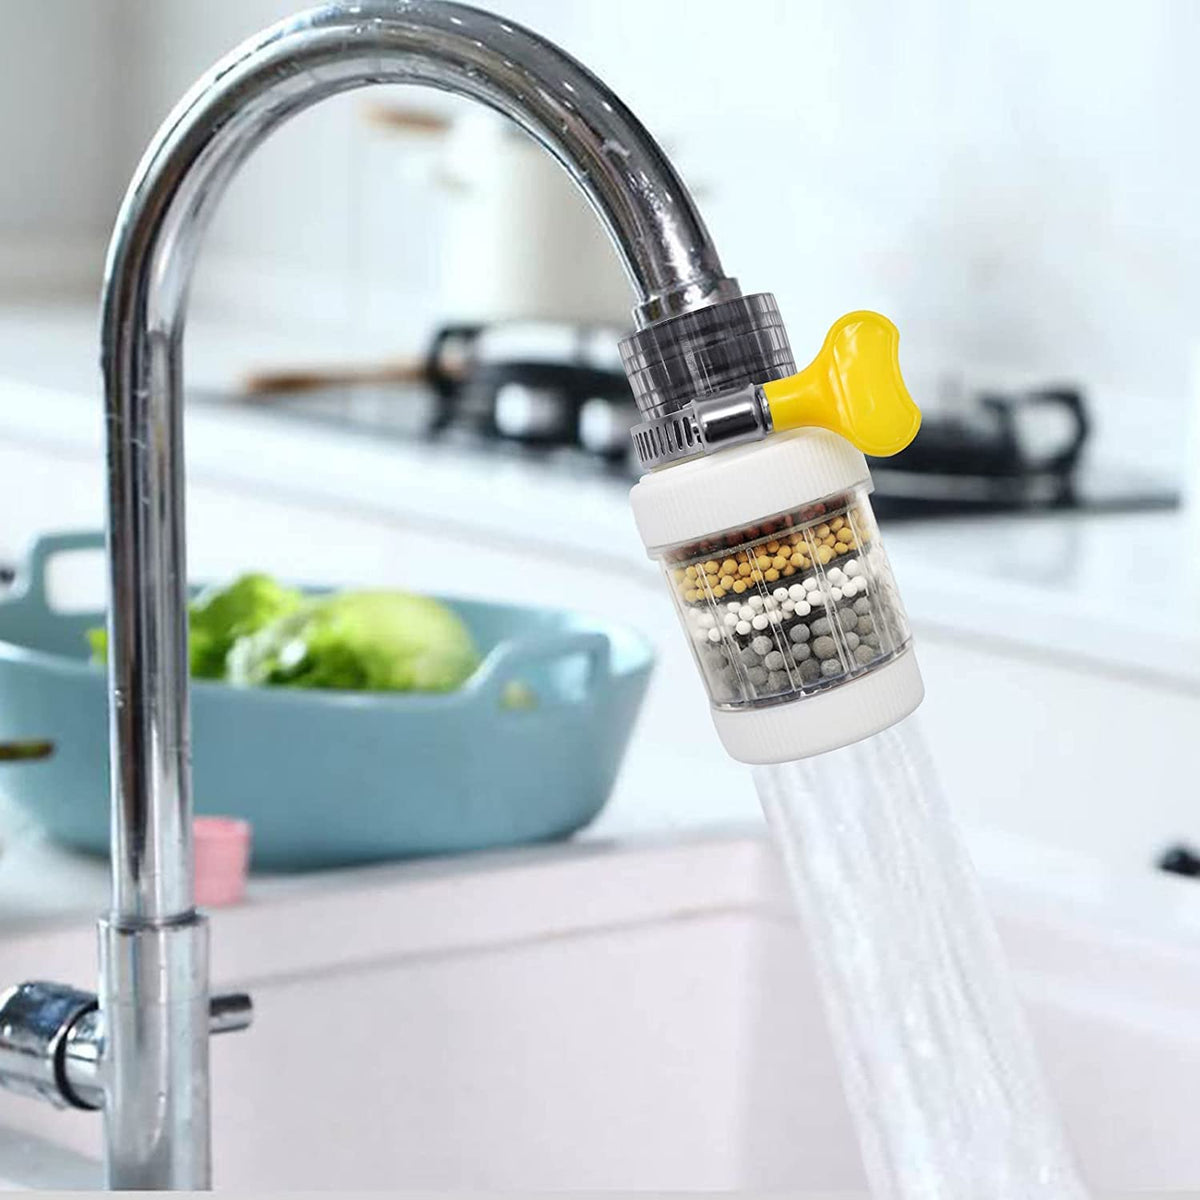 1521 Faucet Water Filter Tap Purifier for Kitchen Sink, Kitchen Tap Activated Carbon Filtration Clean Purifier 4 Layer Filter for Bathroom Home, DeoDap